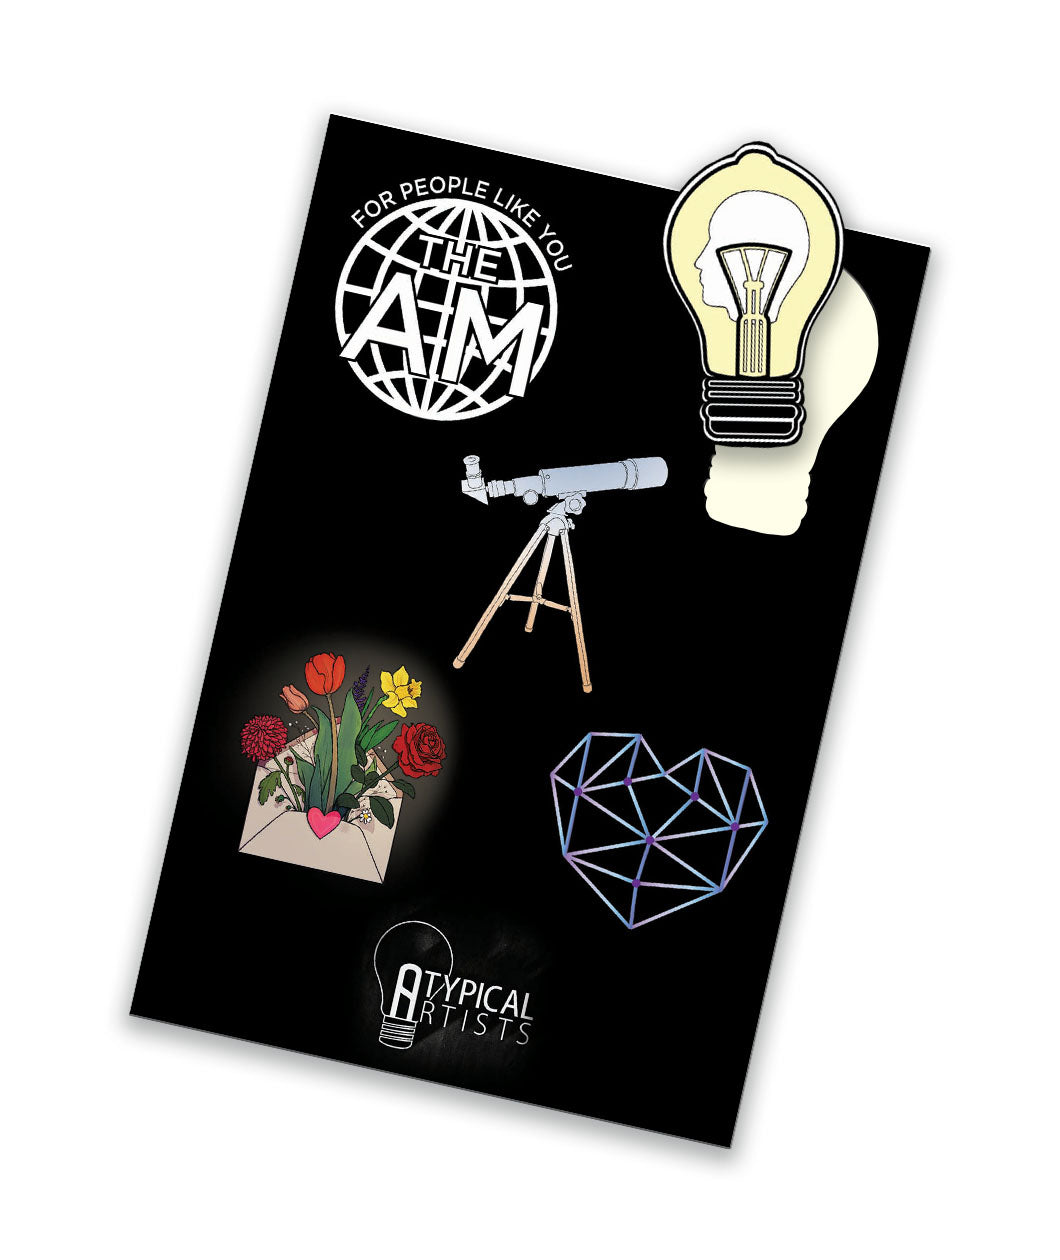 A sticker sheet featuring five different stickers. One is a white circle with "The AM" written in the middle and "For People Like You" written above it. One is a light bulb with the silhouette of a head profile. One is a telescope. One is a heart with geometric connected lines. One is an envelope with flowers coming out. From Atypical Artists - The Bright Sessions.  